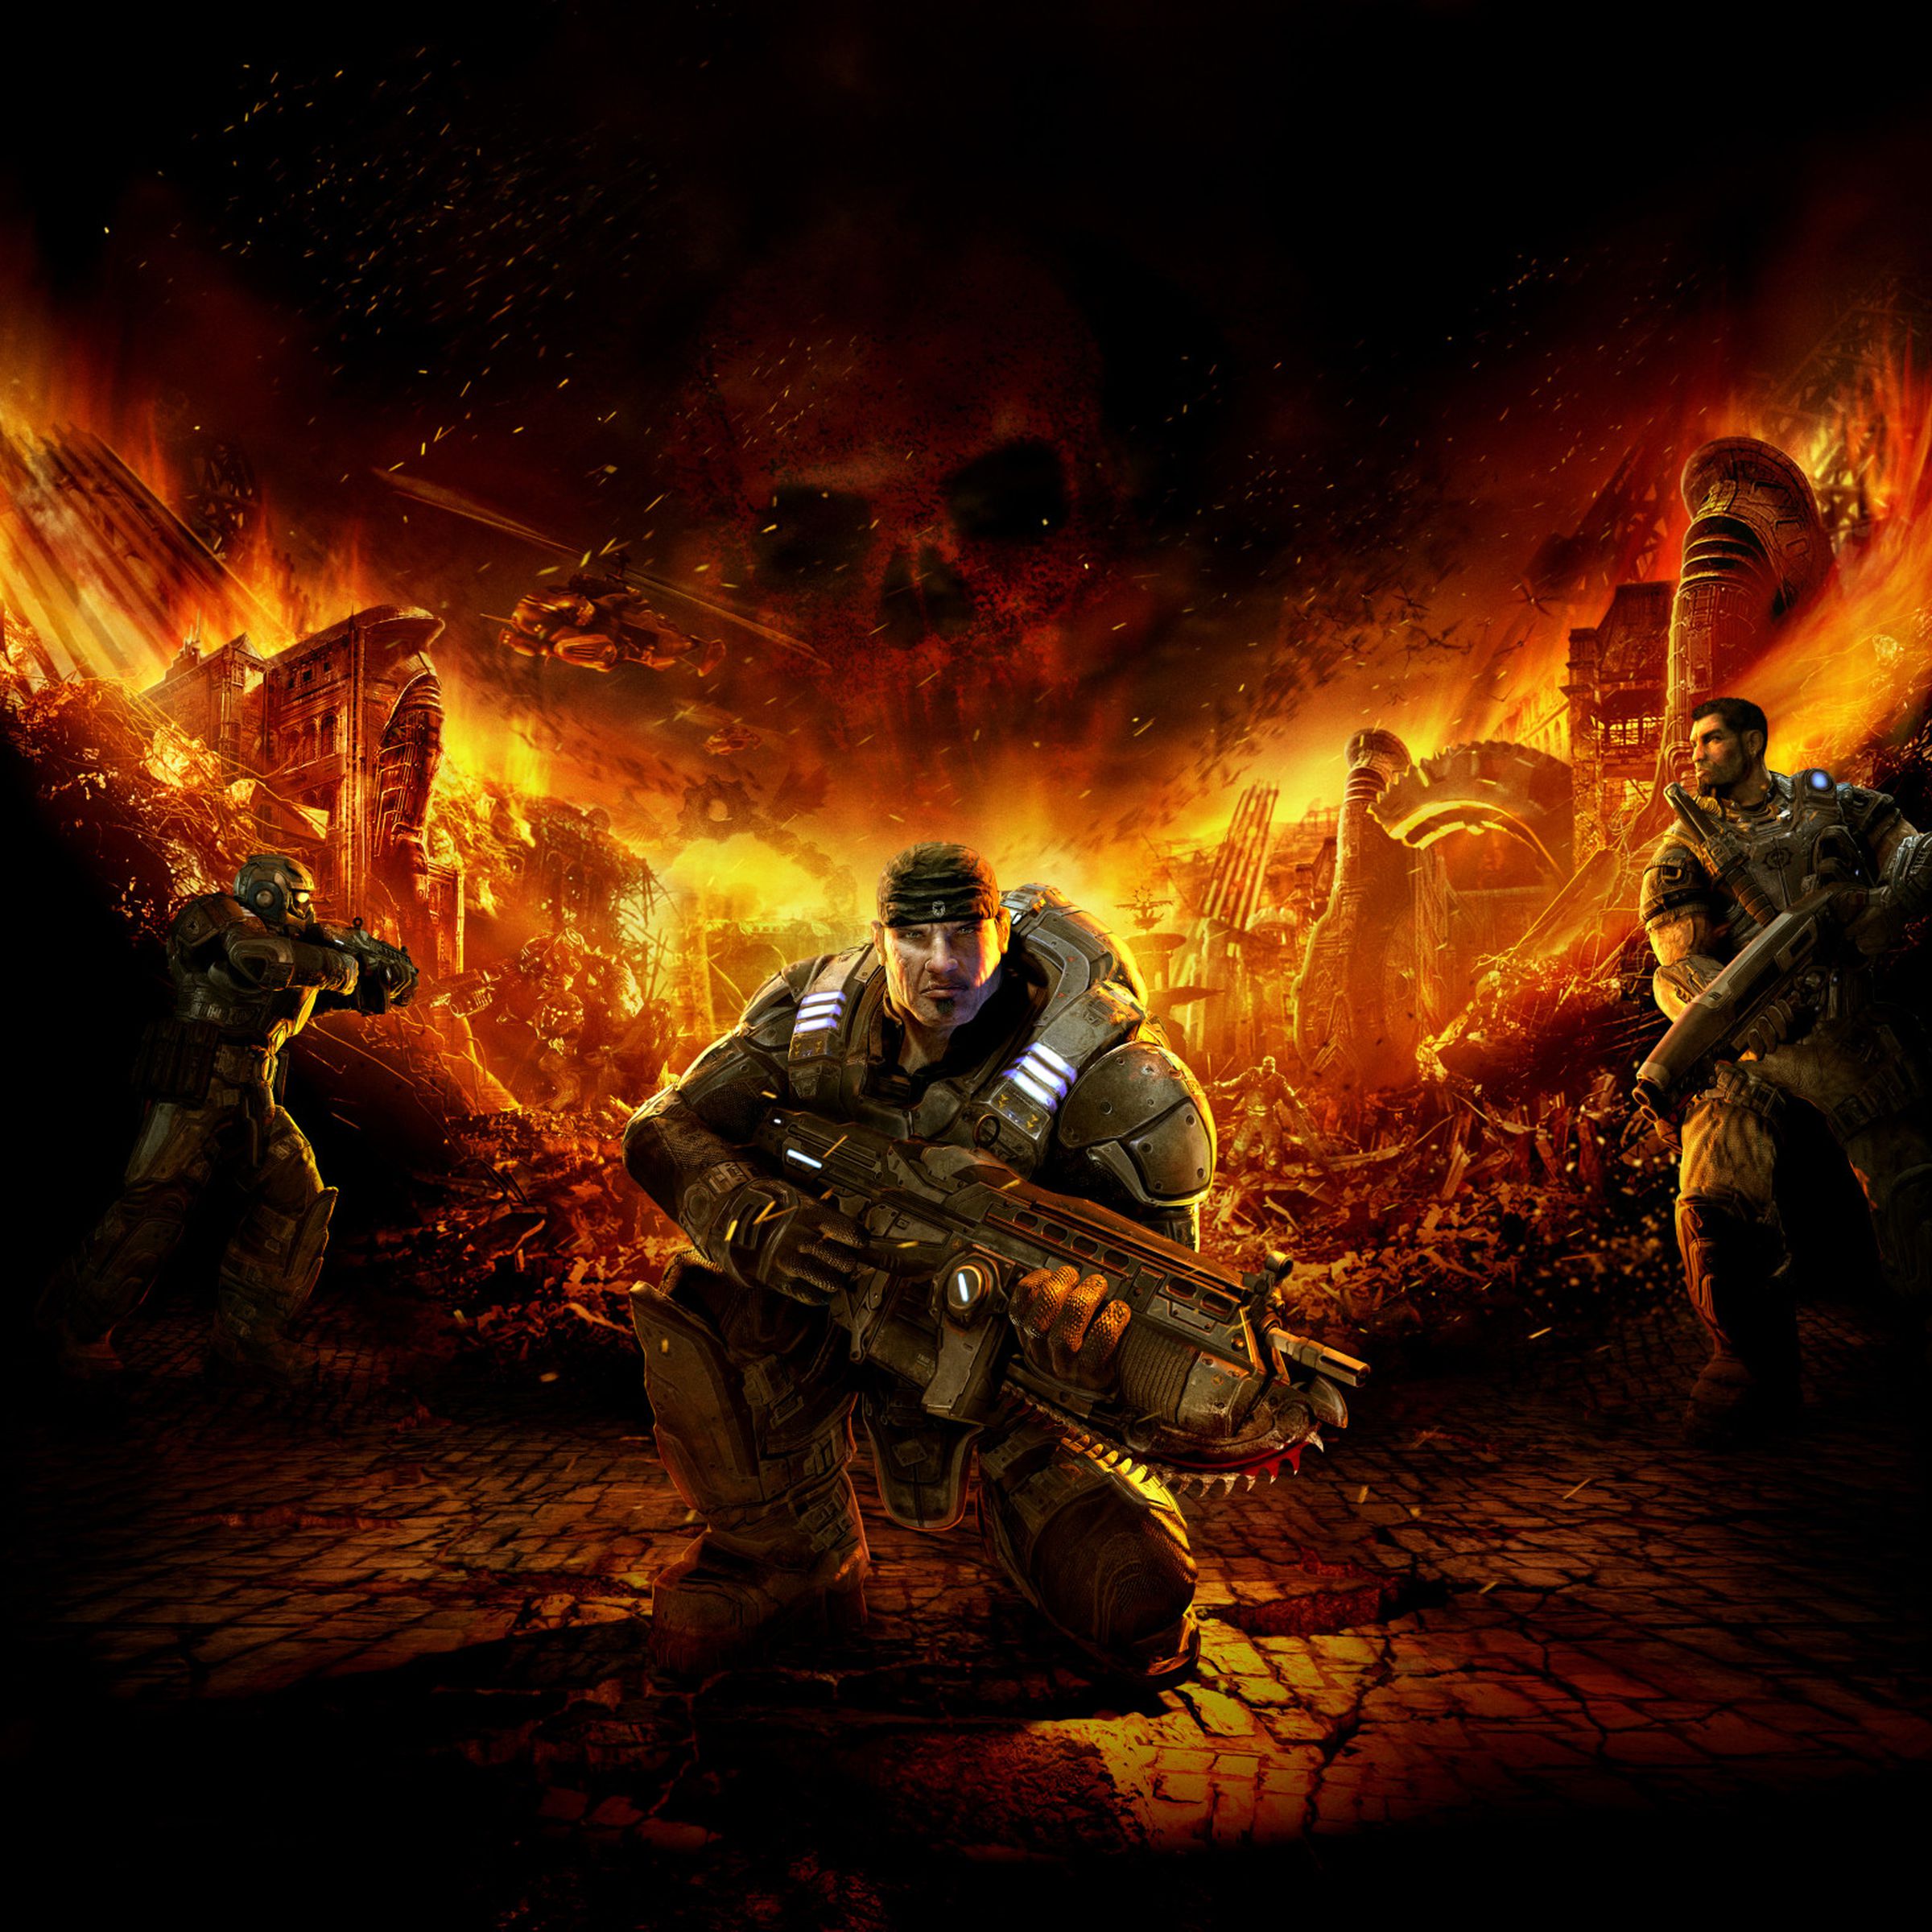 Promotional art featuring three Gears of War characters.